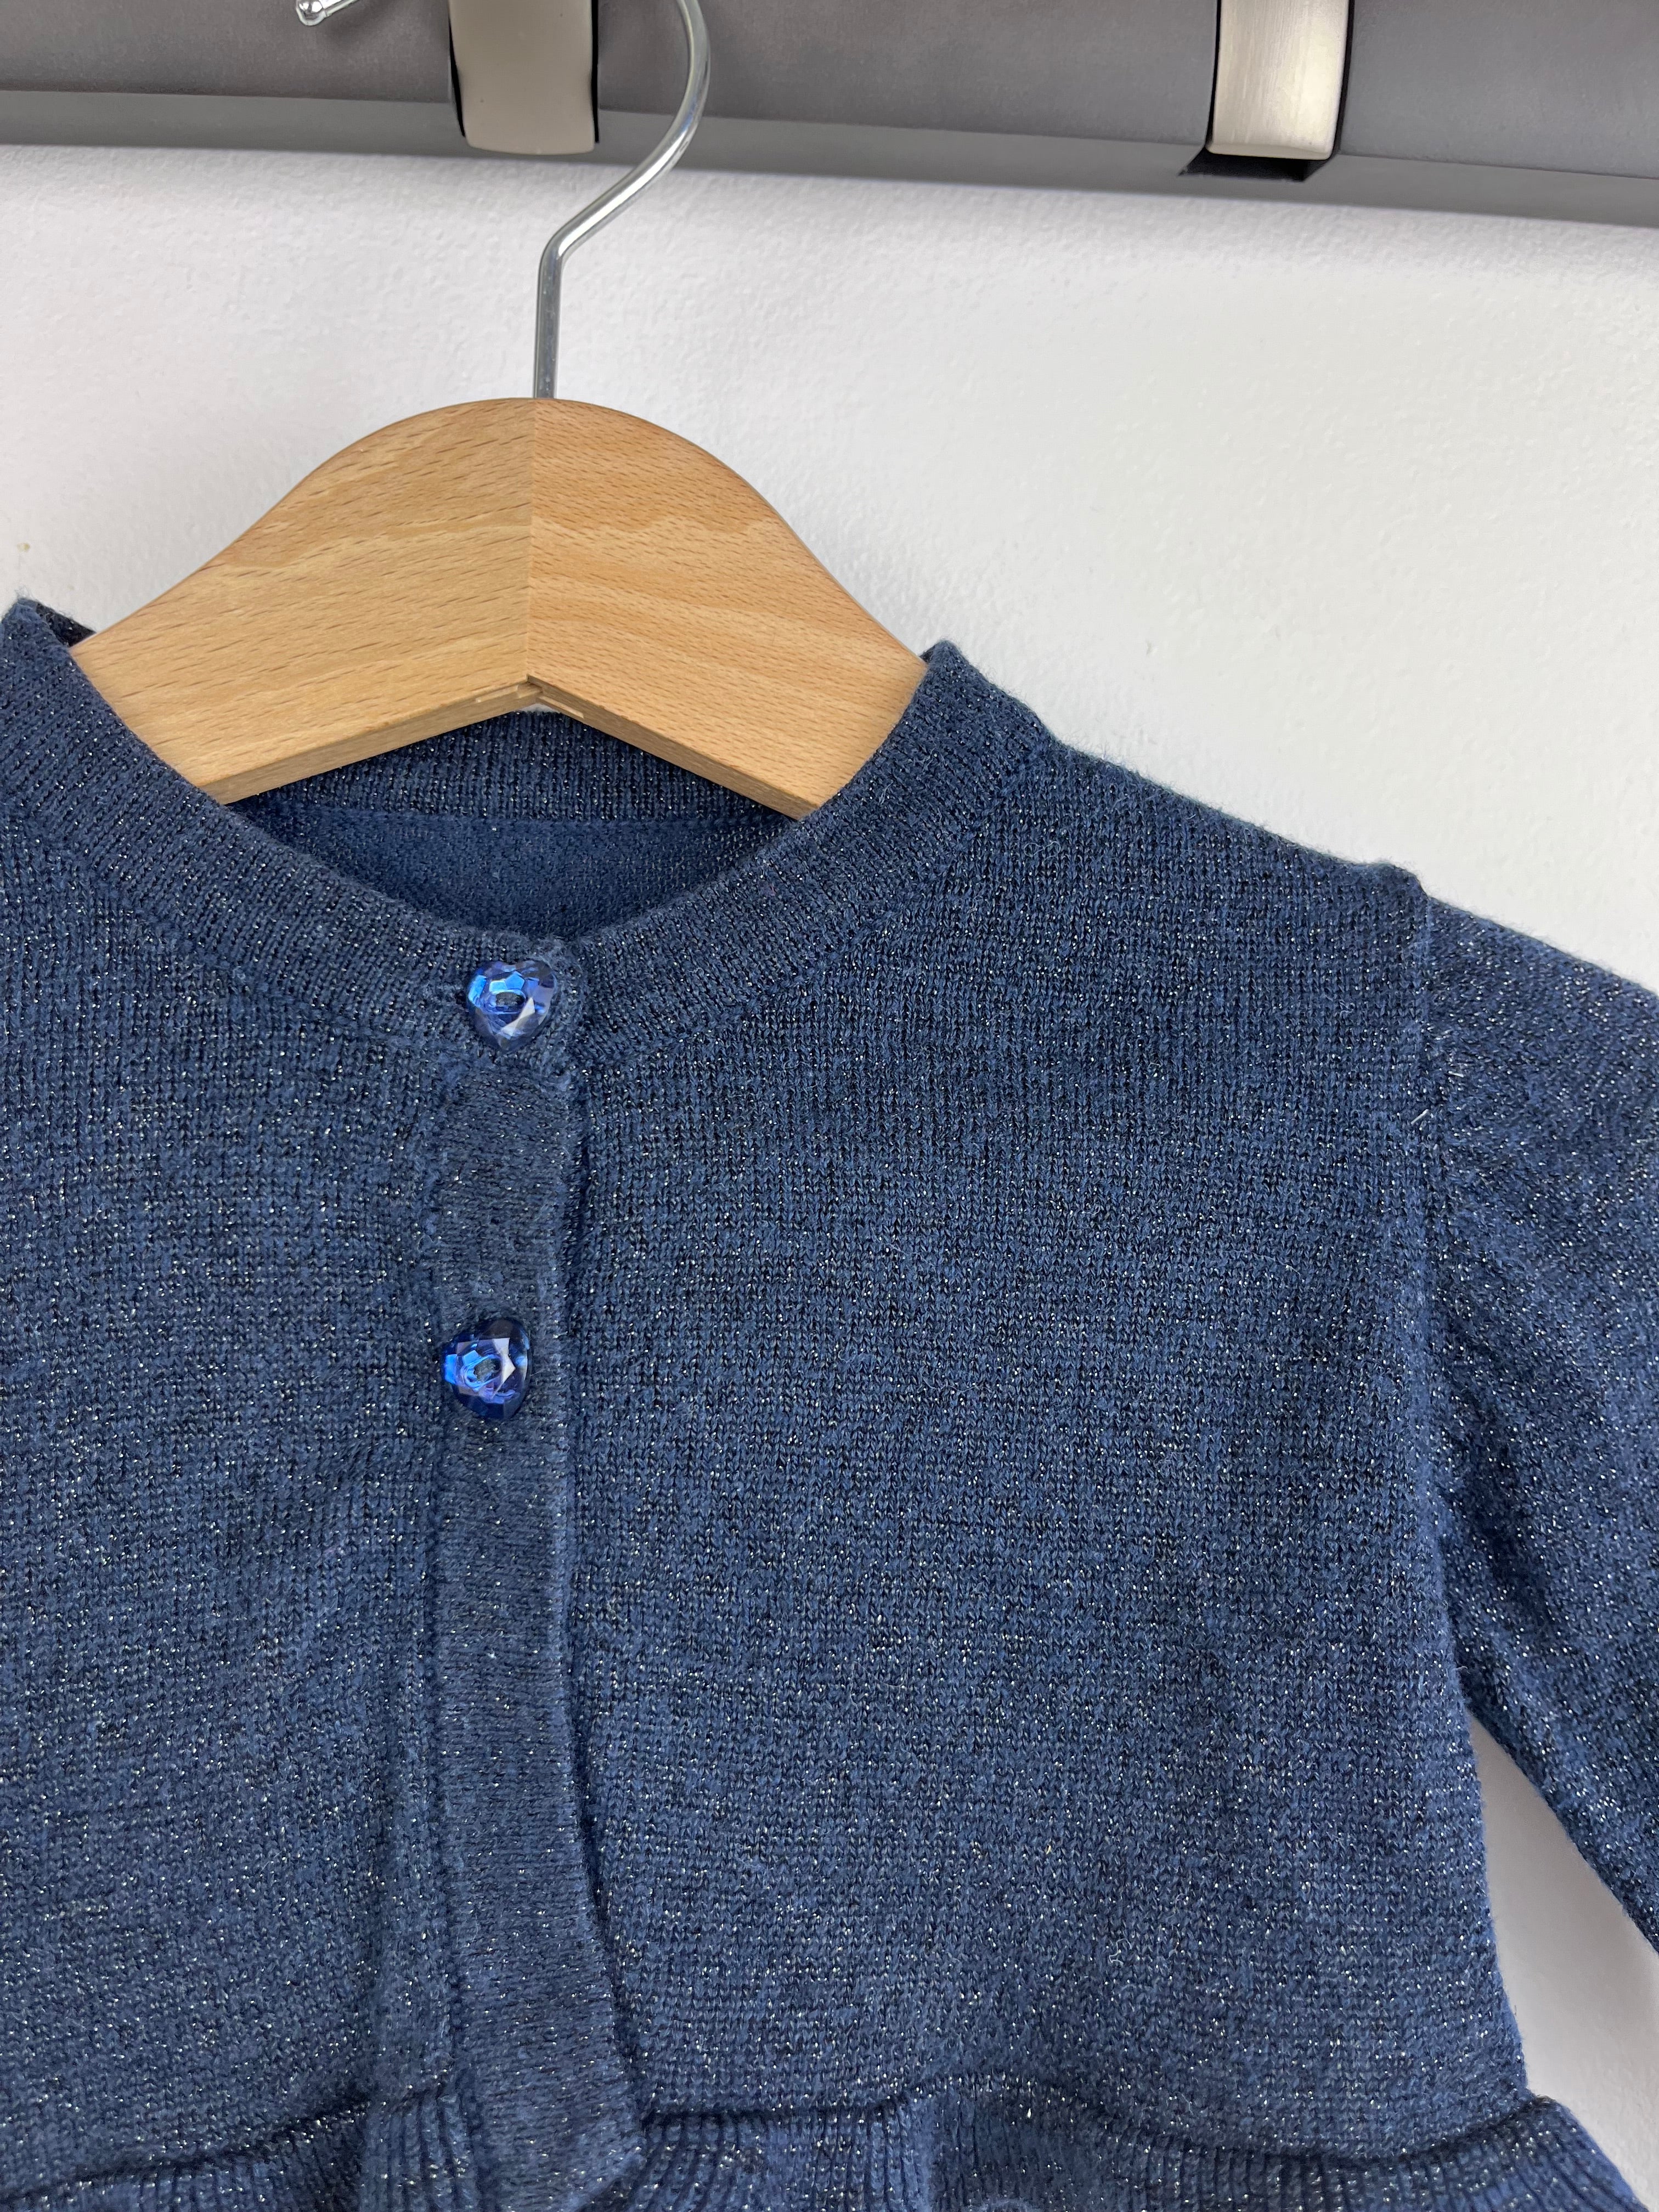 Matalan 3-6 Months-Cardigans-Second Snuggle Preloved